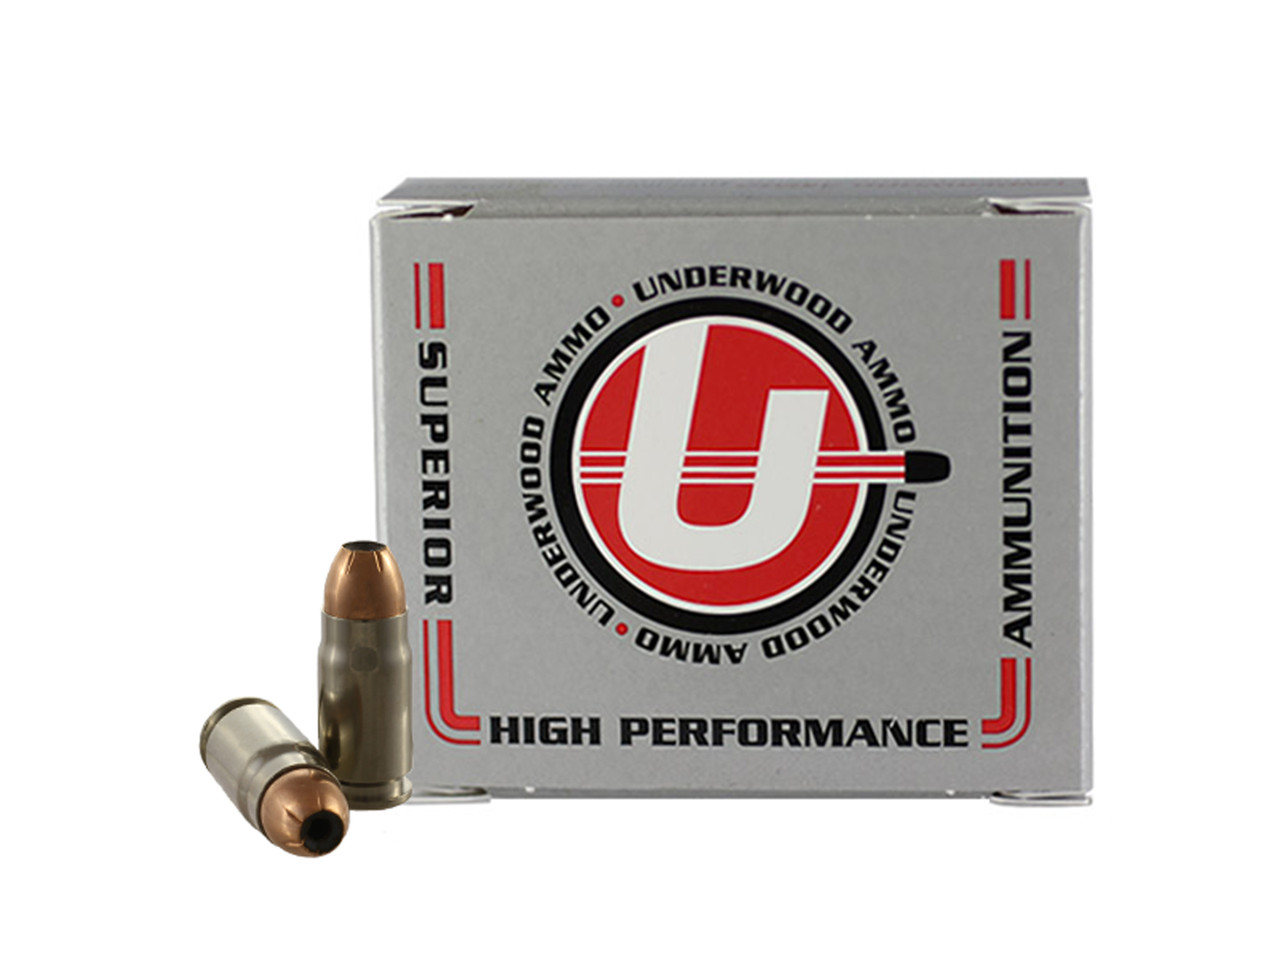 357 sig 124 grain sporting jacketed hollow point hunting and self defense ammo sku 147 123491678419339256